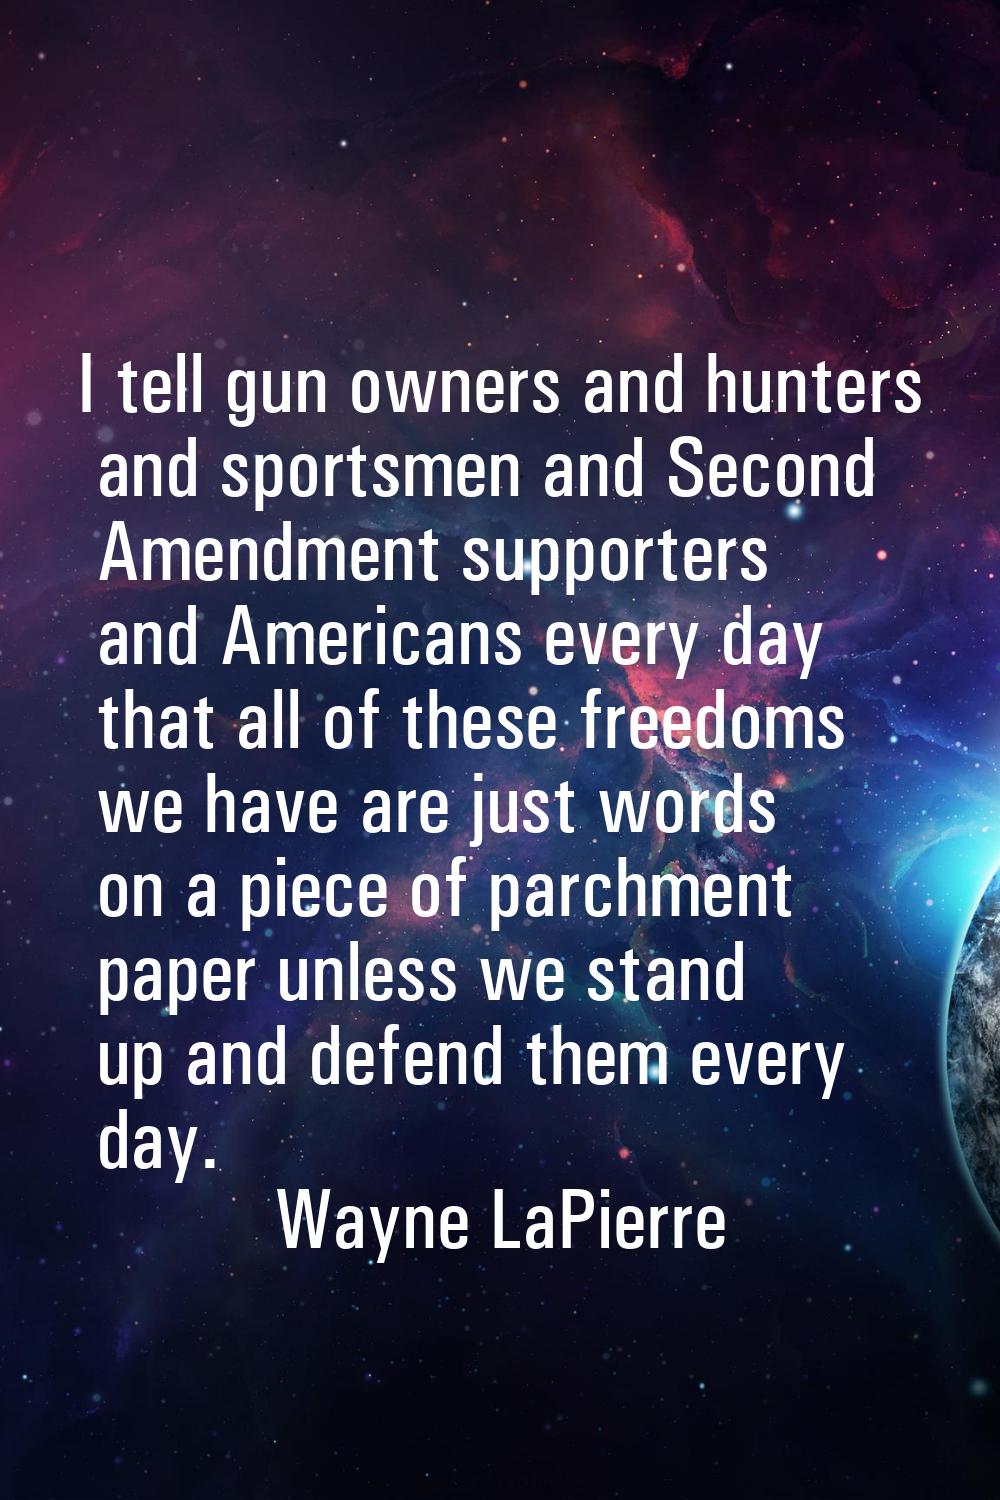 I tell gun owners and hunters and sportsmen and Second Amendment supporters and Americans every day